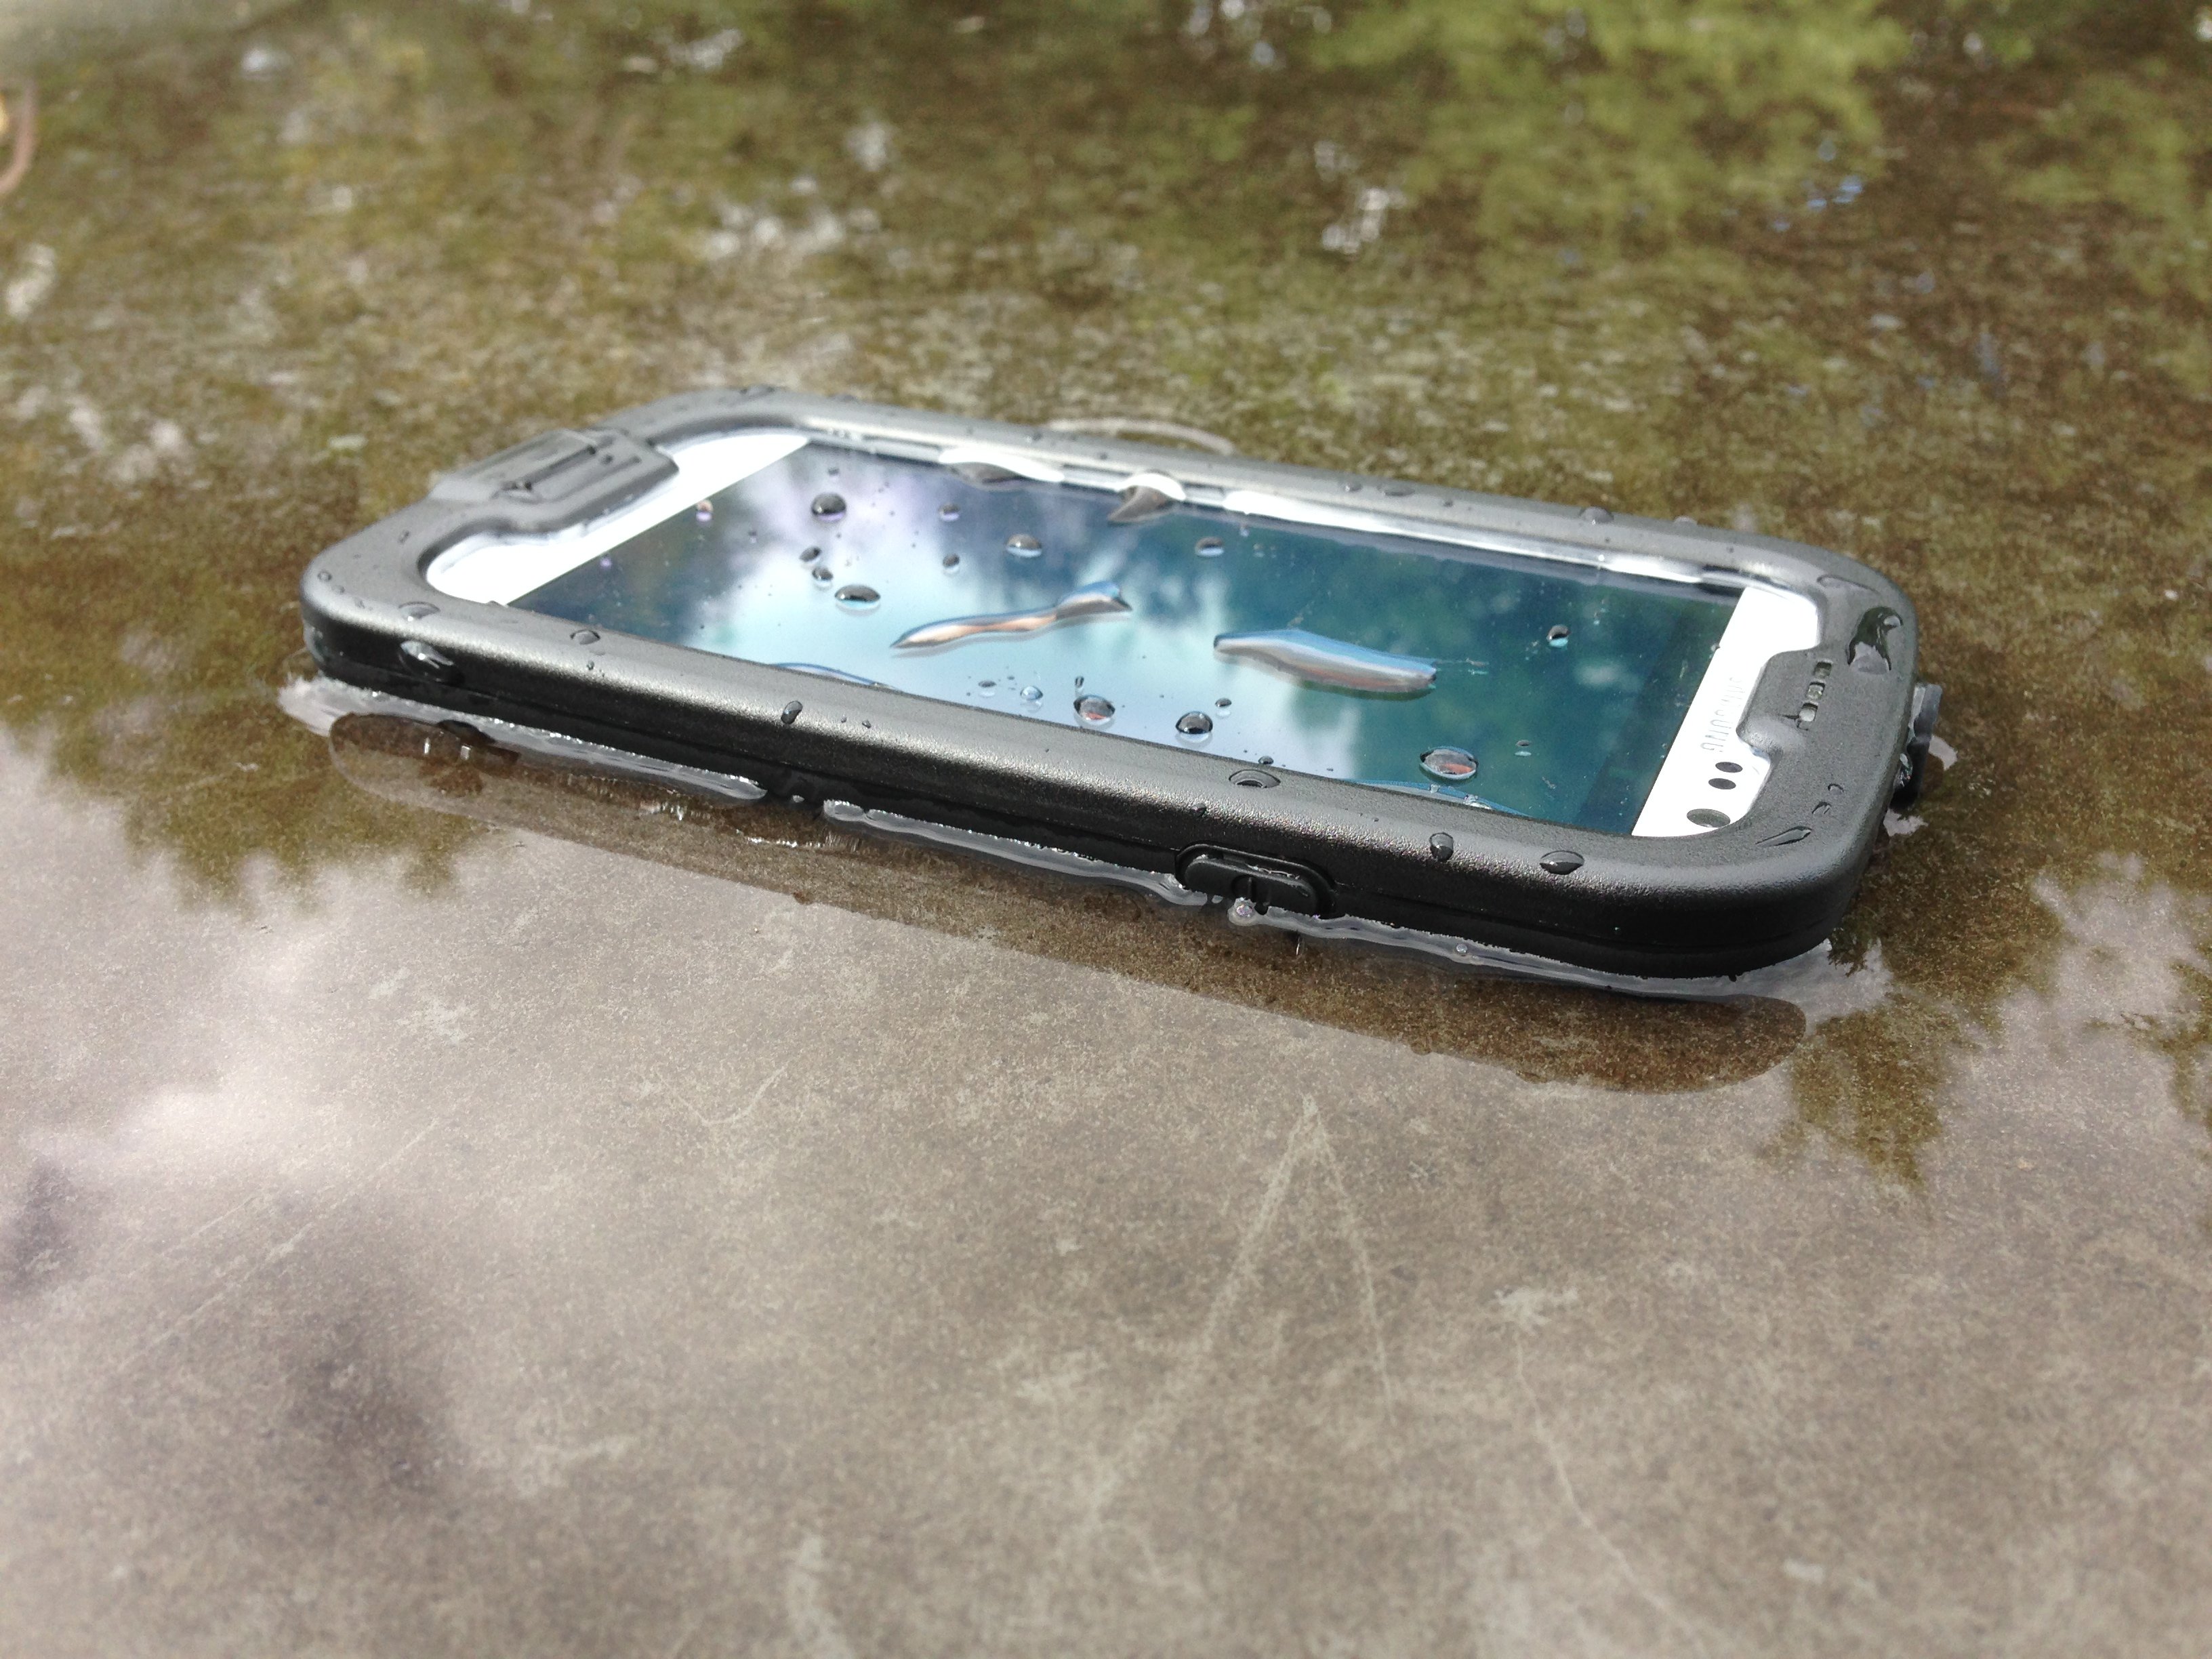 Count on a waterproof Galaxy S6 LifeProof case, and a Galaxy S6 Edge Model. (LifeProof Galaxy S3 case shown).